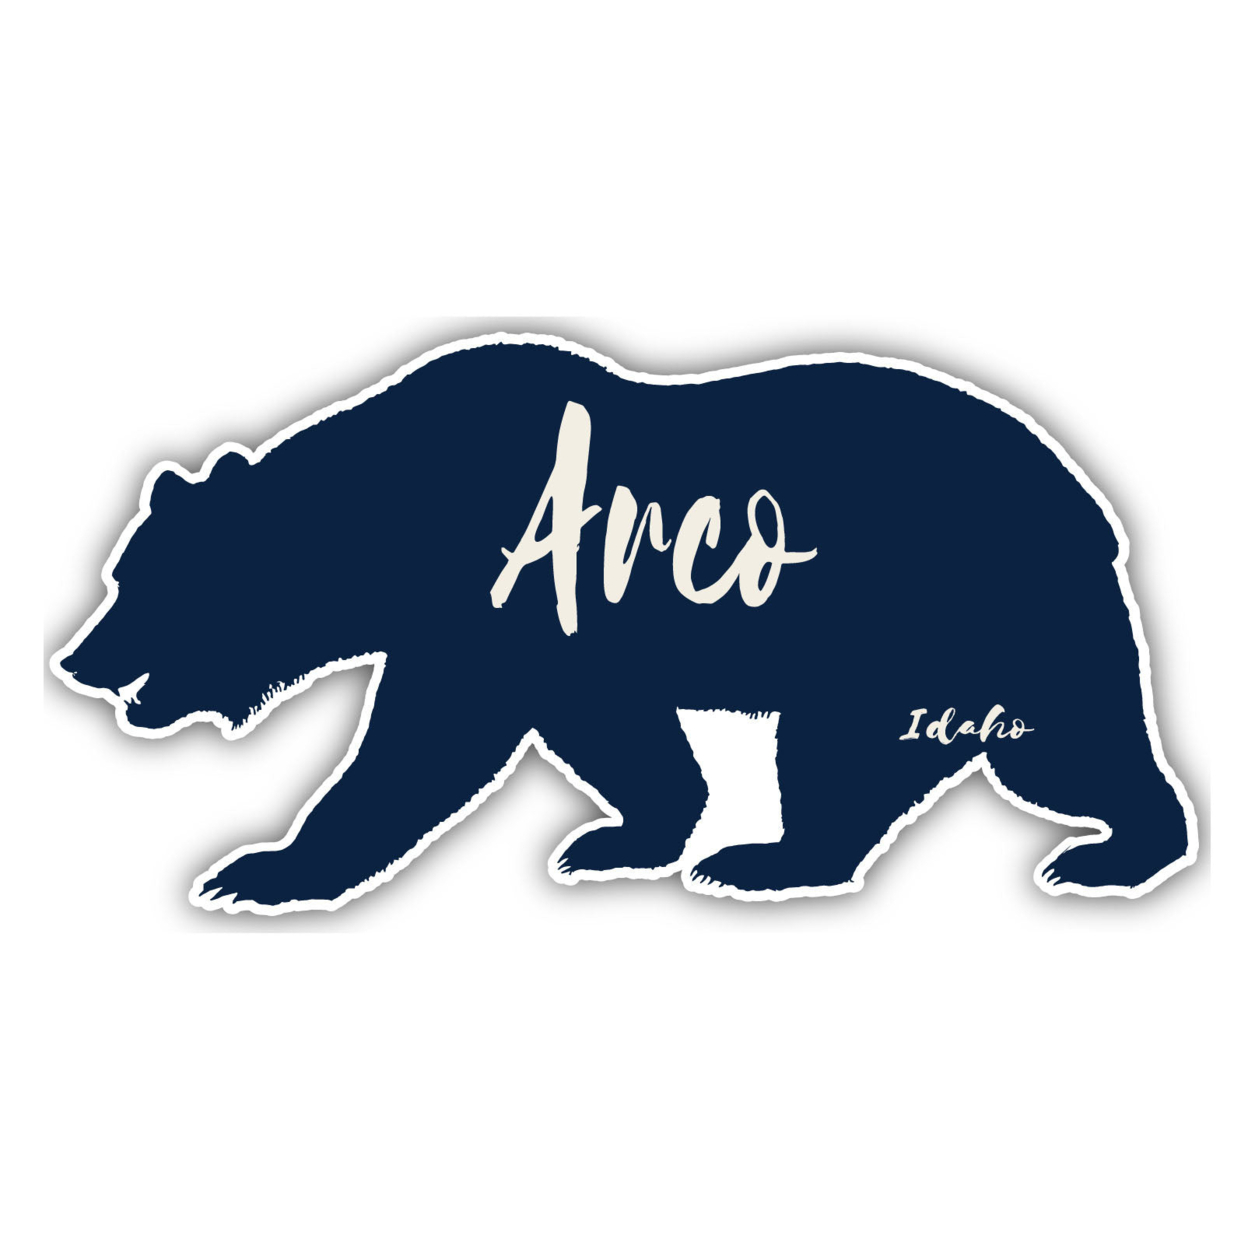 Arco Idaho Souvenir Decorative Stickers (Choose Theme And Size) - 4-Pack, 6-Inch, Great Outdoors